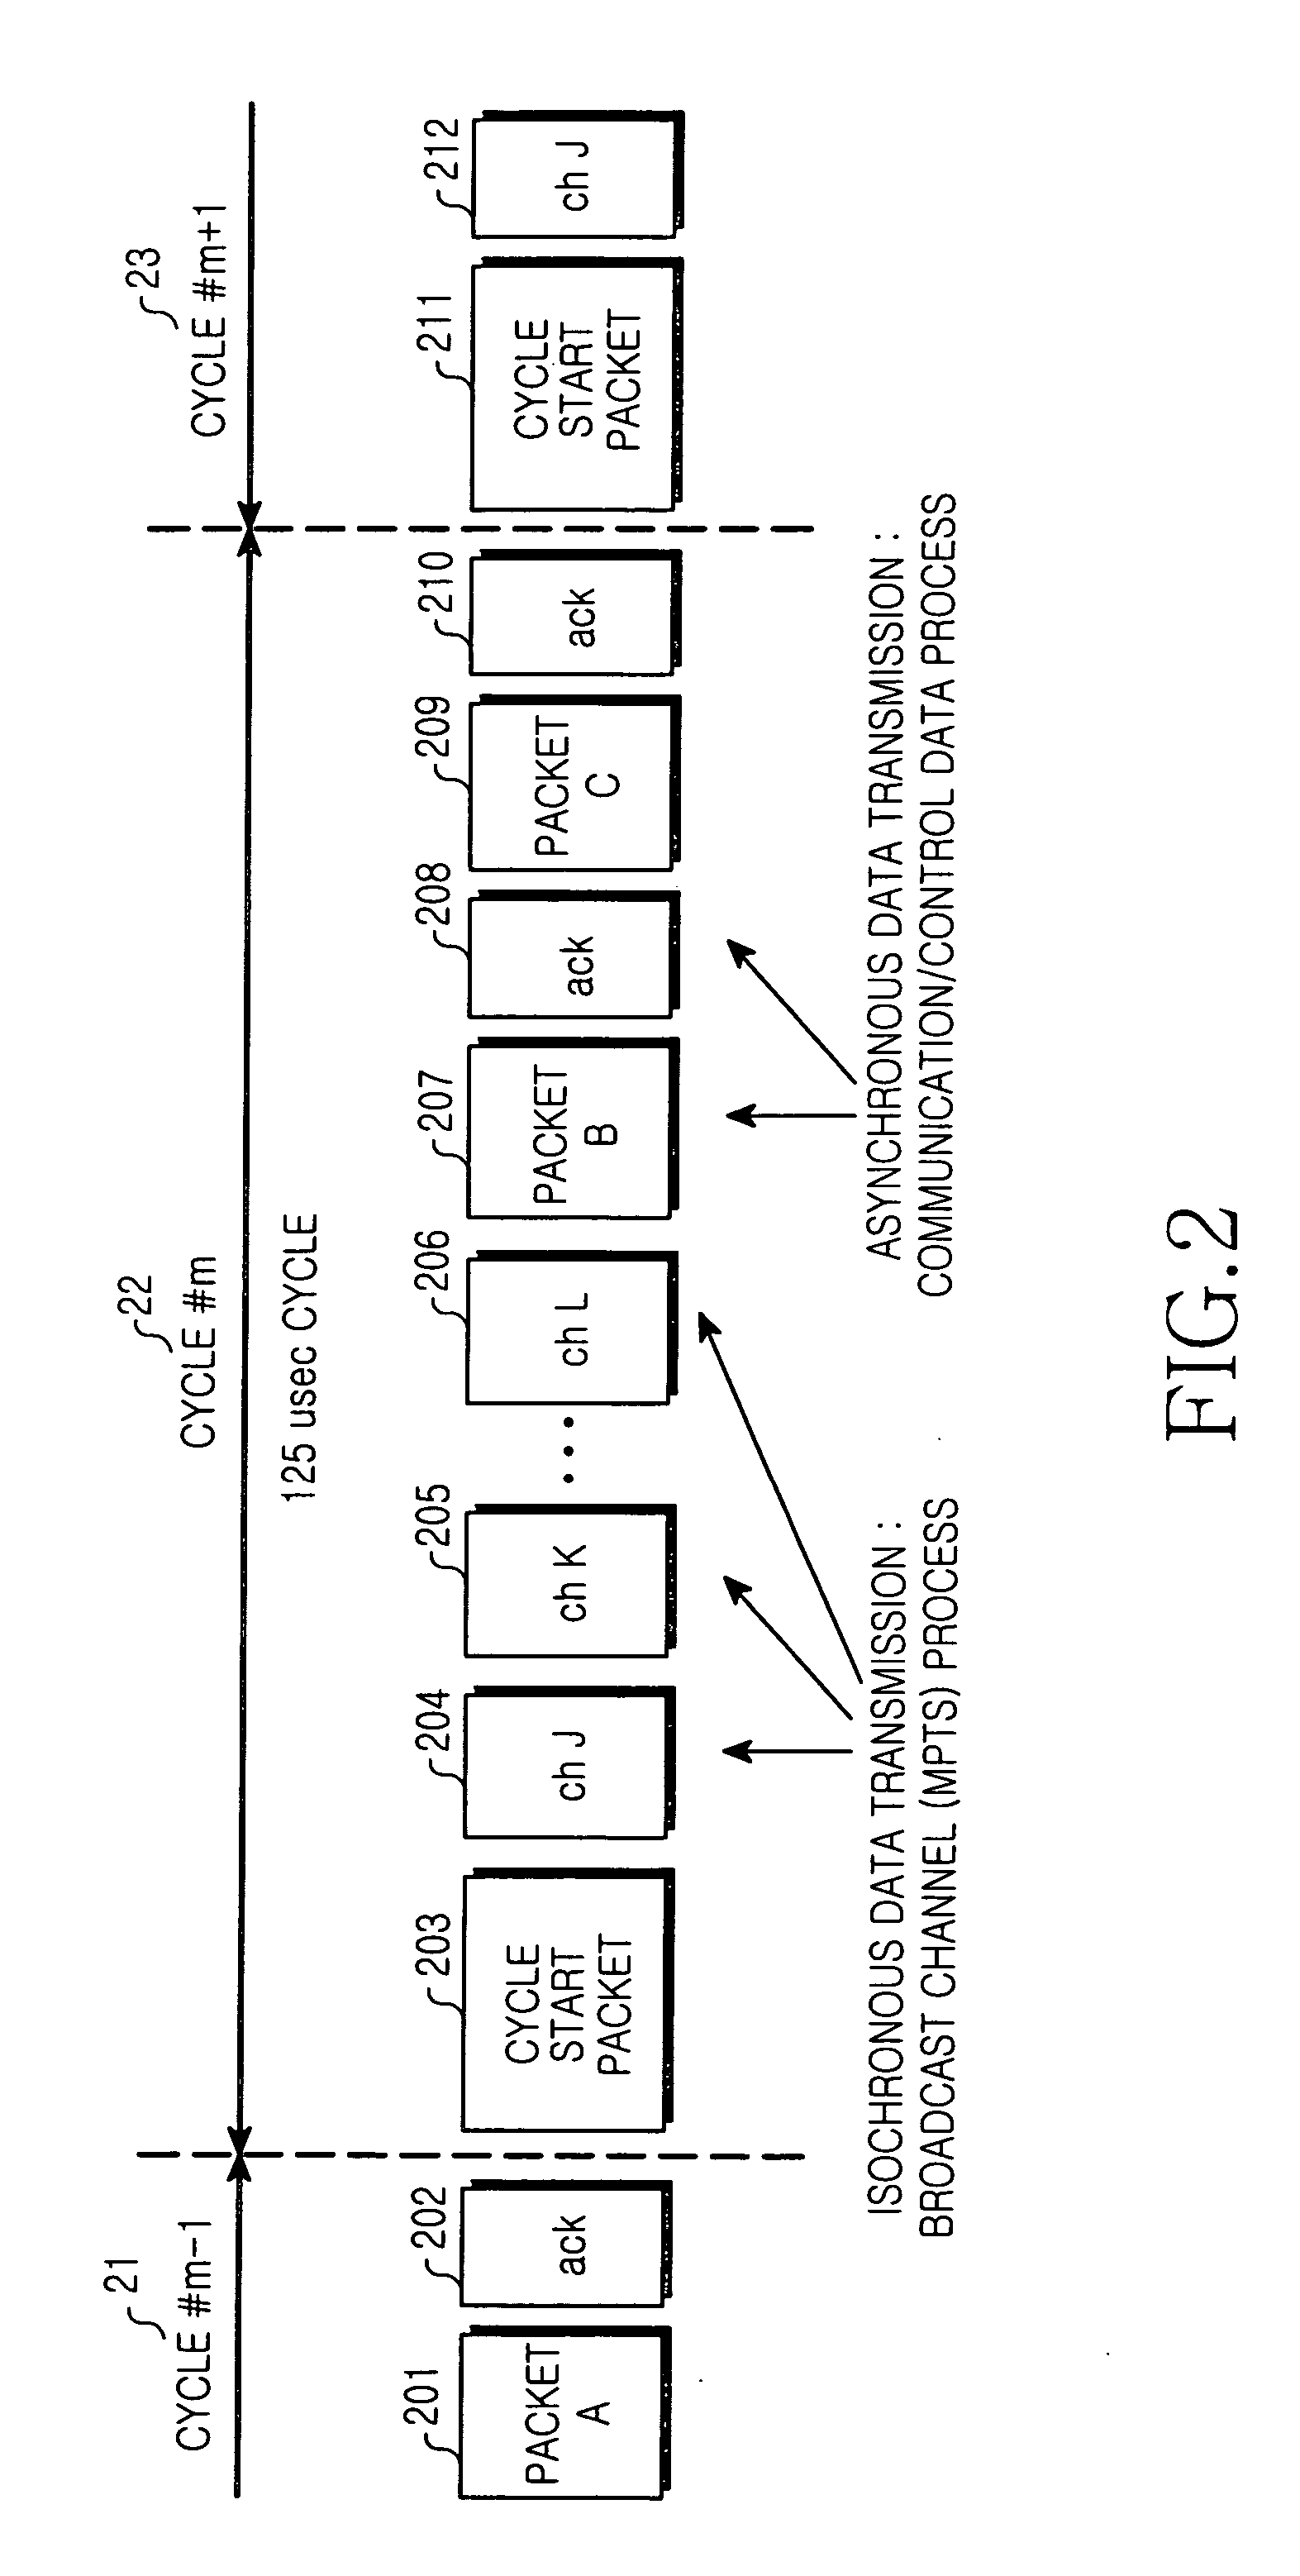 Optical network unit for an access network employing IEEE1394